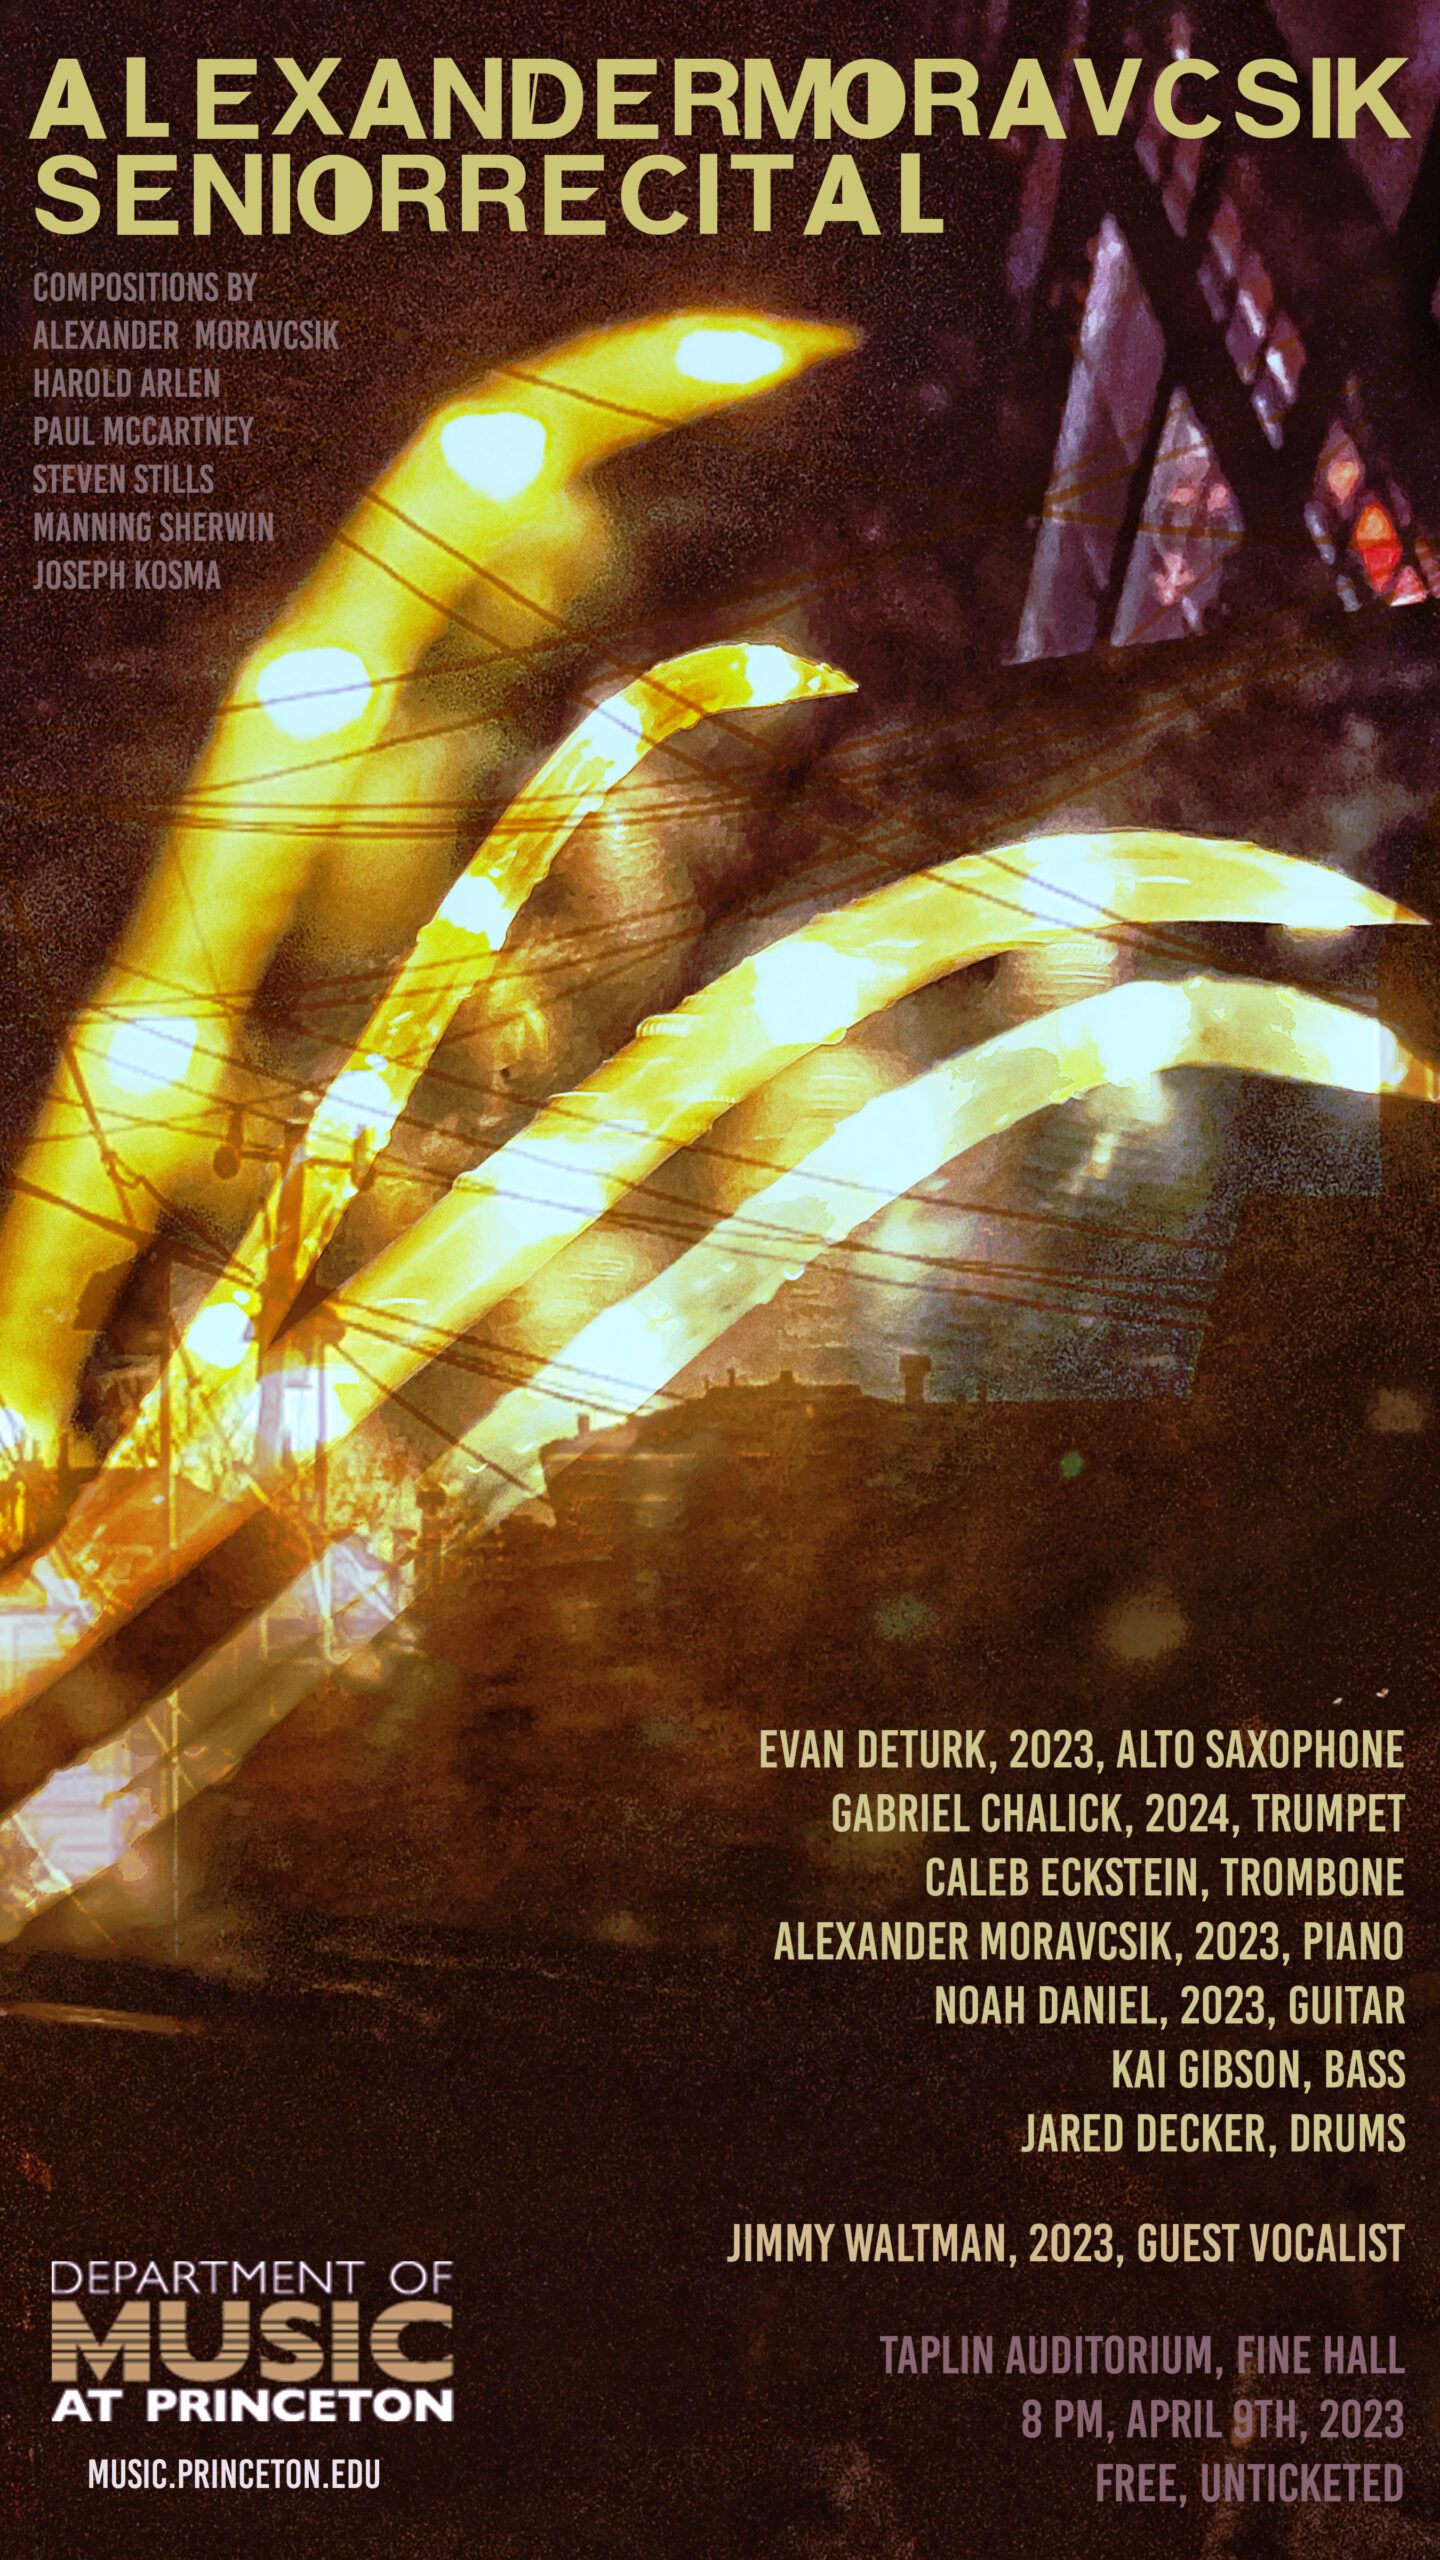 poster for Alexander Moravcsik Senior Recital, with a darkened burgundy background and glowing lights